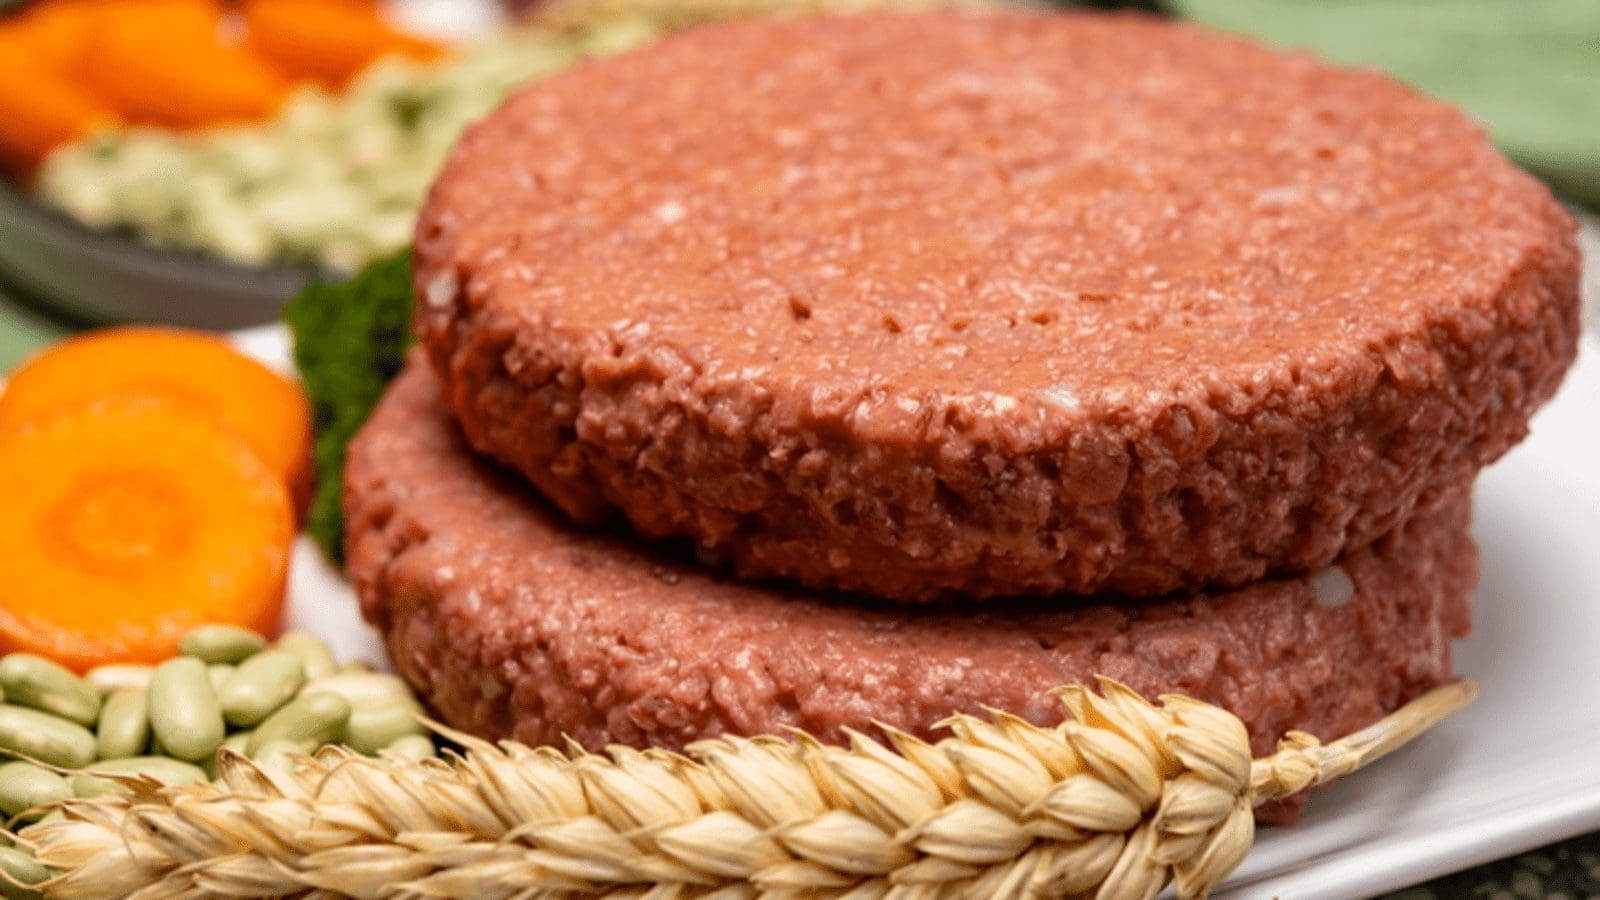 Plant-based meat industry poised for growth despite recent setbacks, say experts